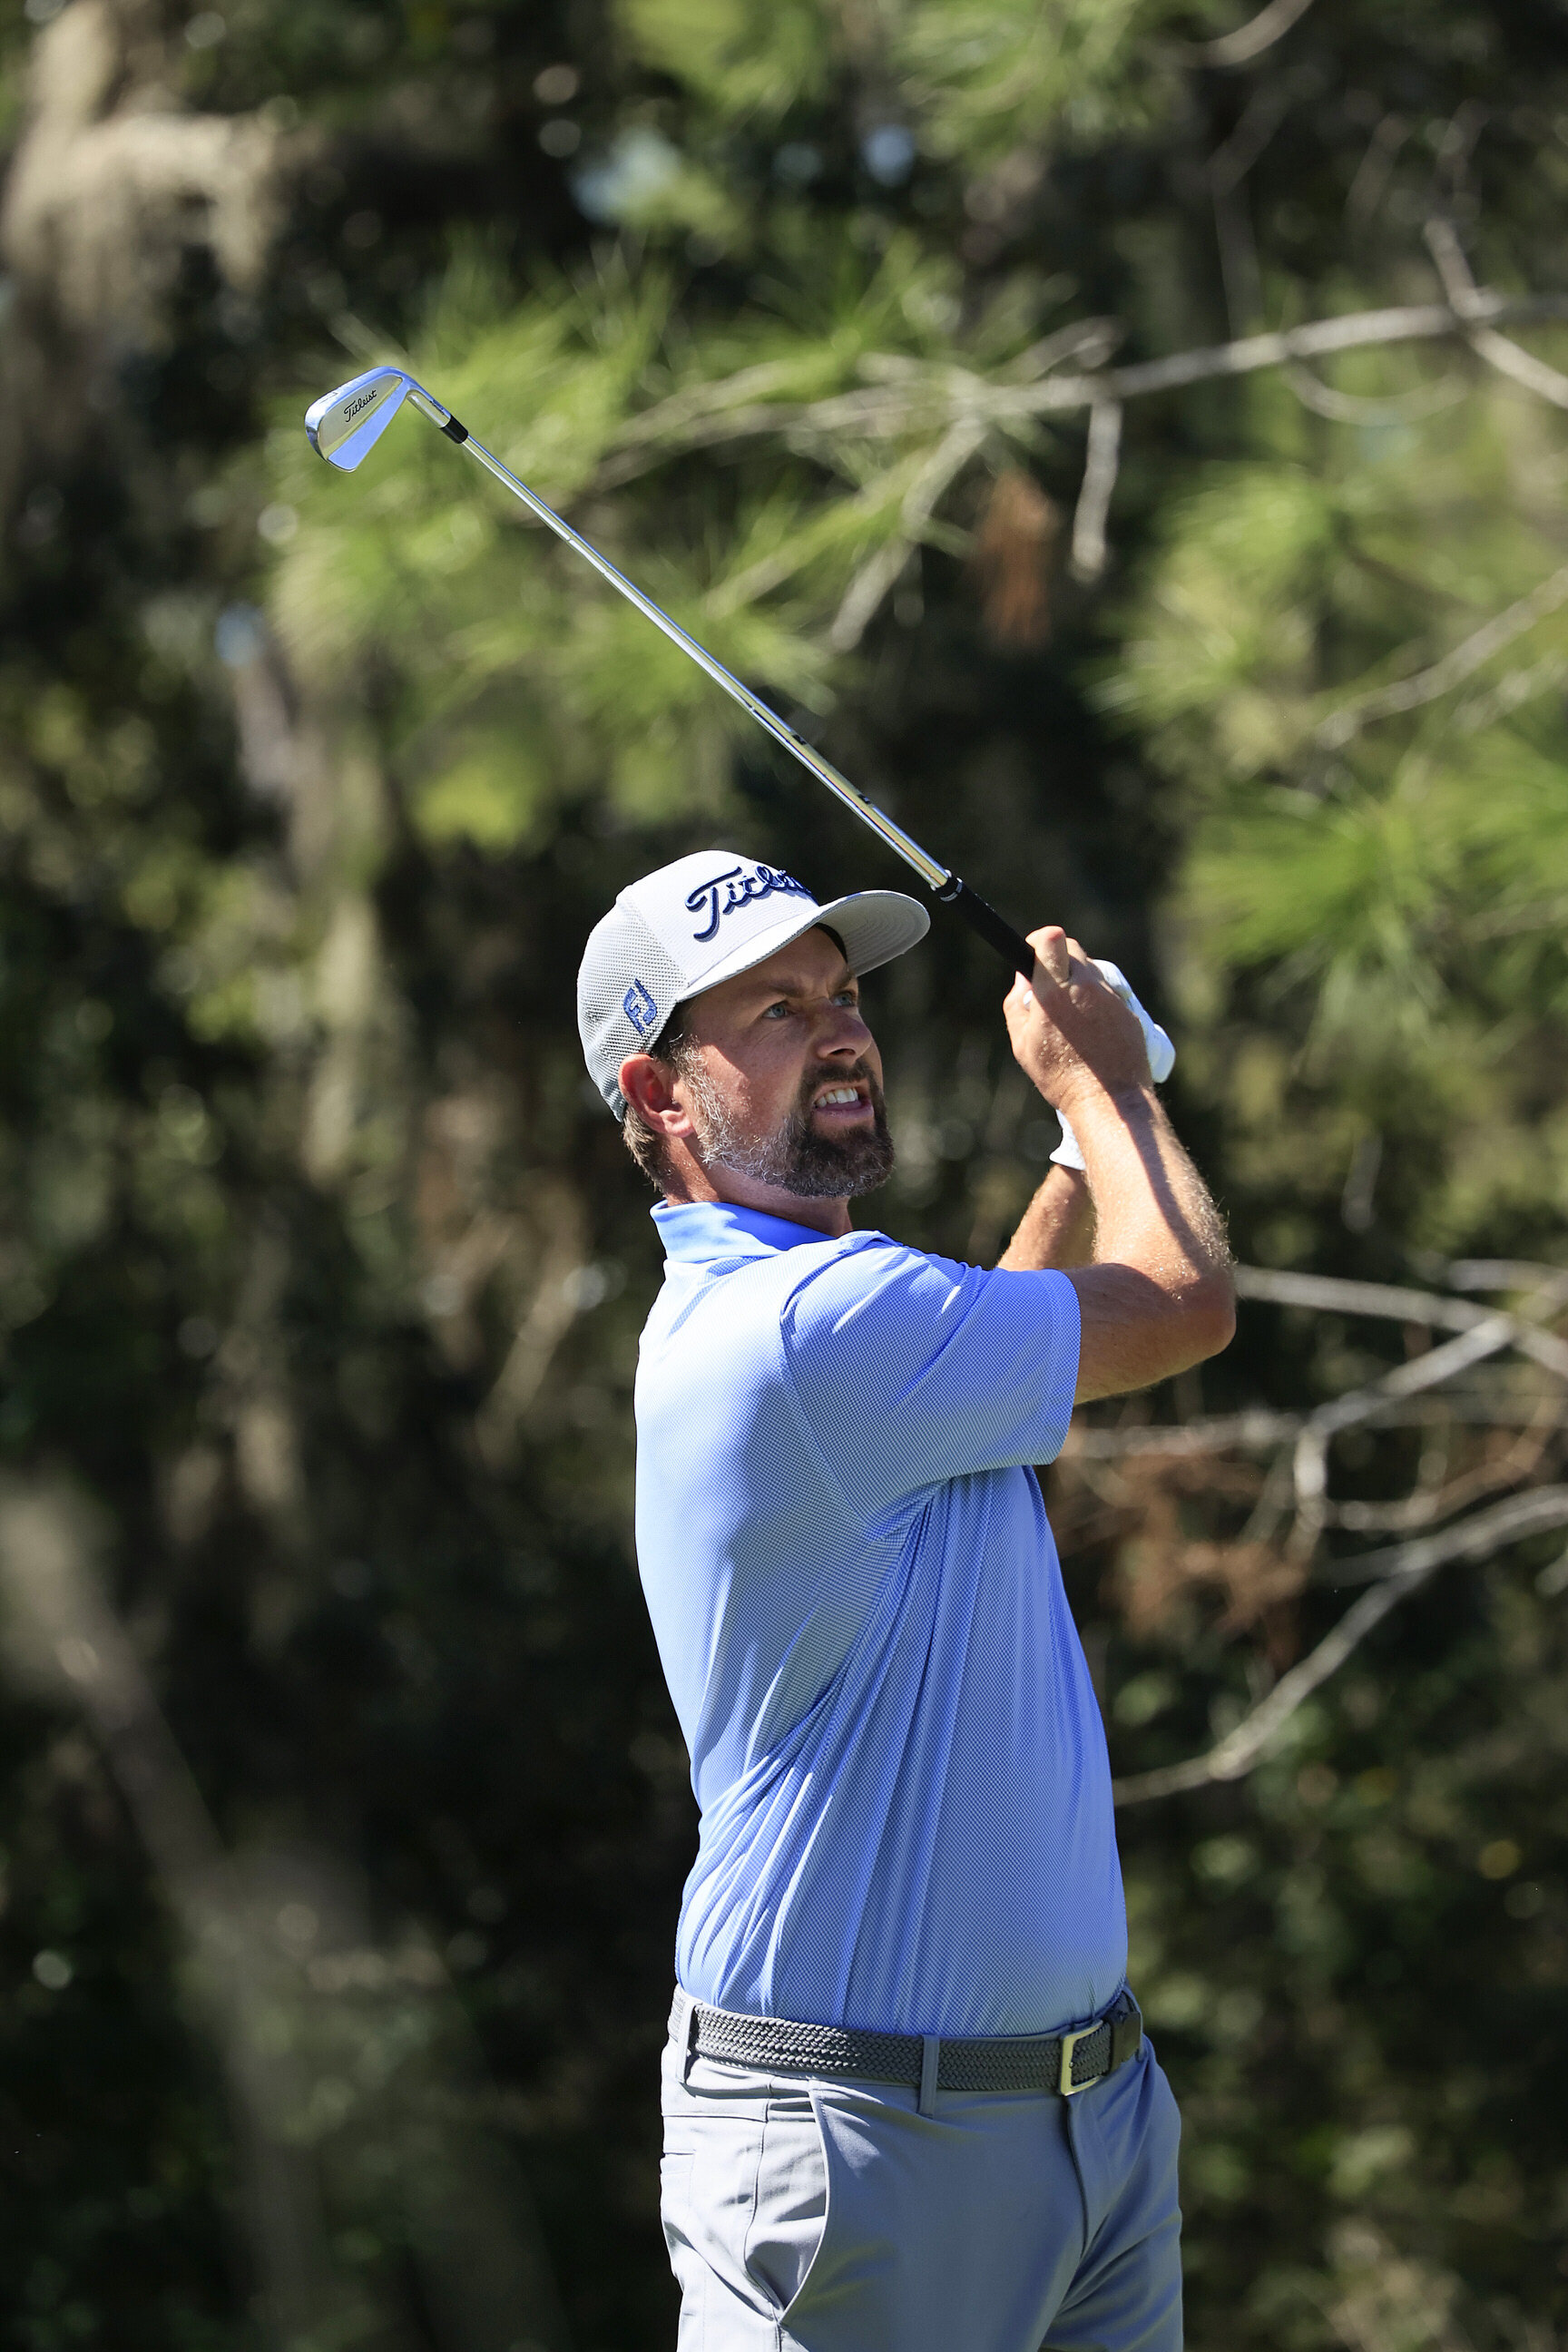  BRADENTON, FLORIDA - FEBRUARY 25: Webb Simpson of the United States plays his shot from the sixth tee during the first round of World Golf Championships-Workday Championship at The Concession on February 25, 2021 in Bradenton, Florida. (Photo by Sam